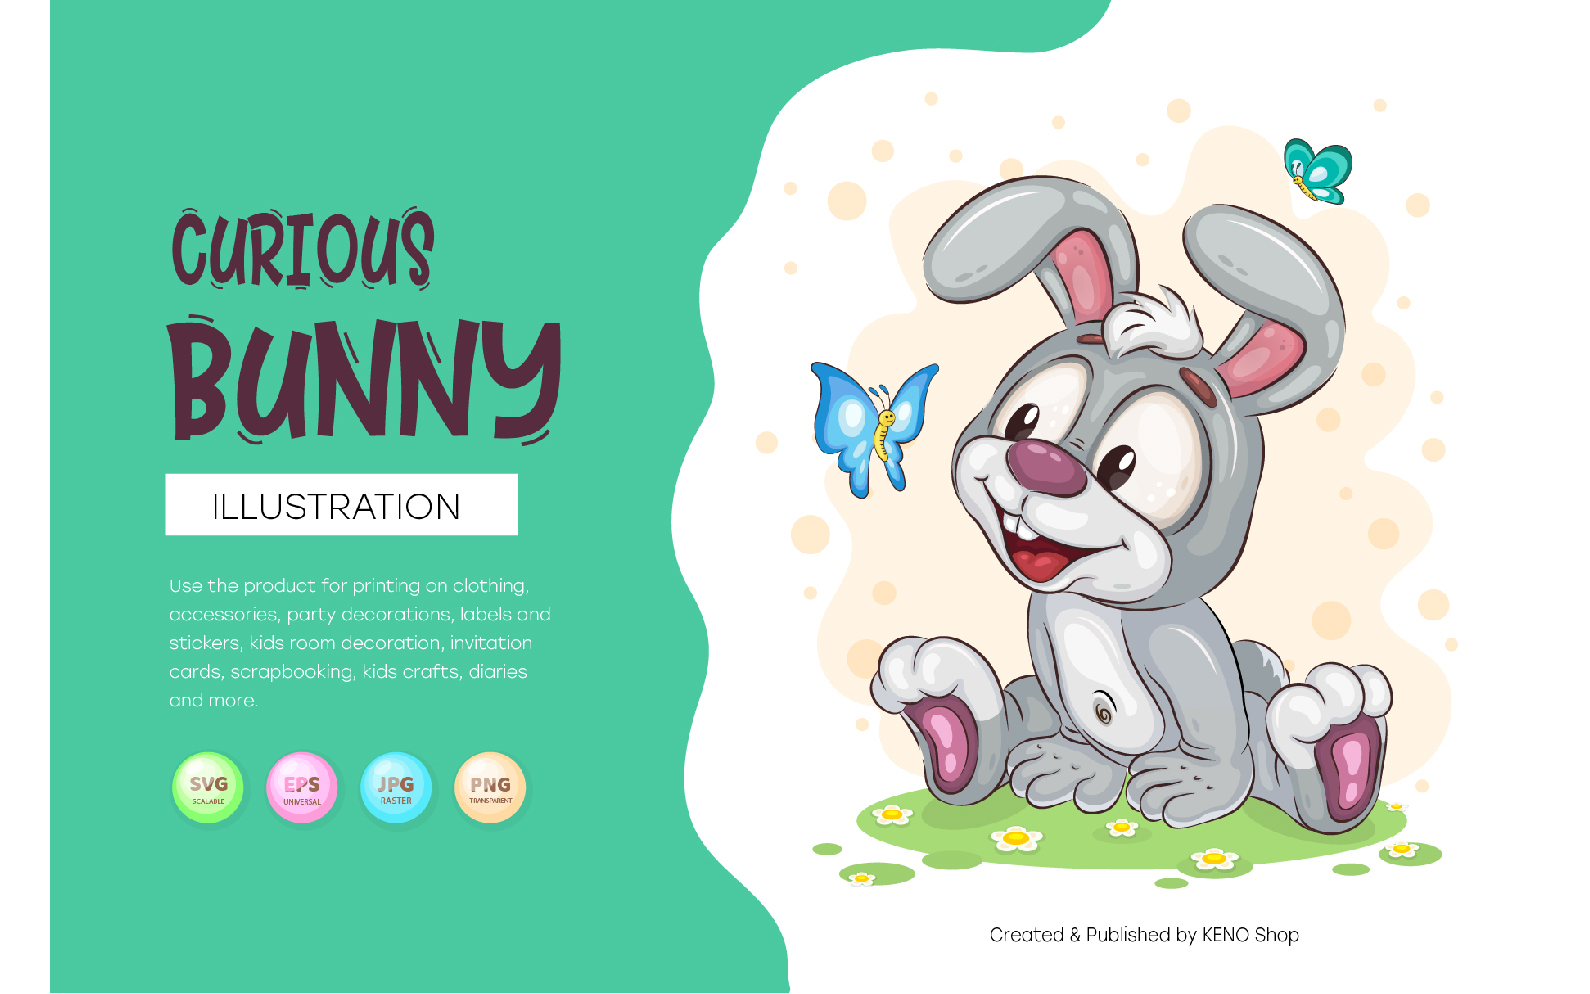 Curious Easter Bunny. T-Shirt, PNG, SVG.